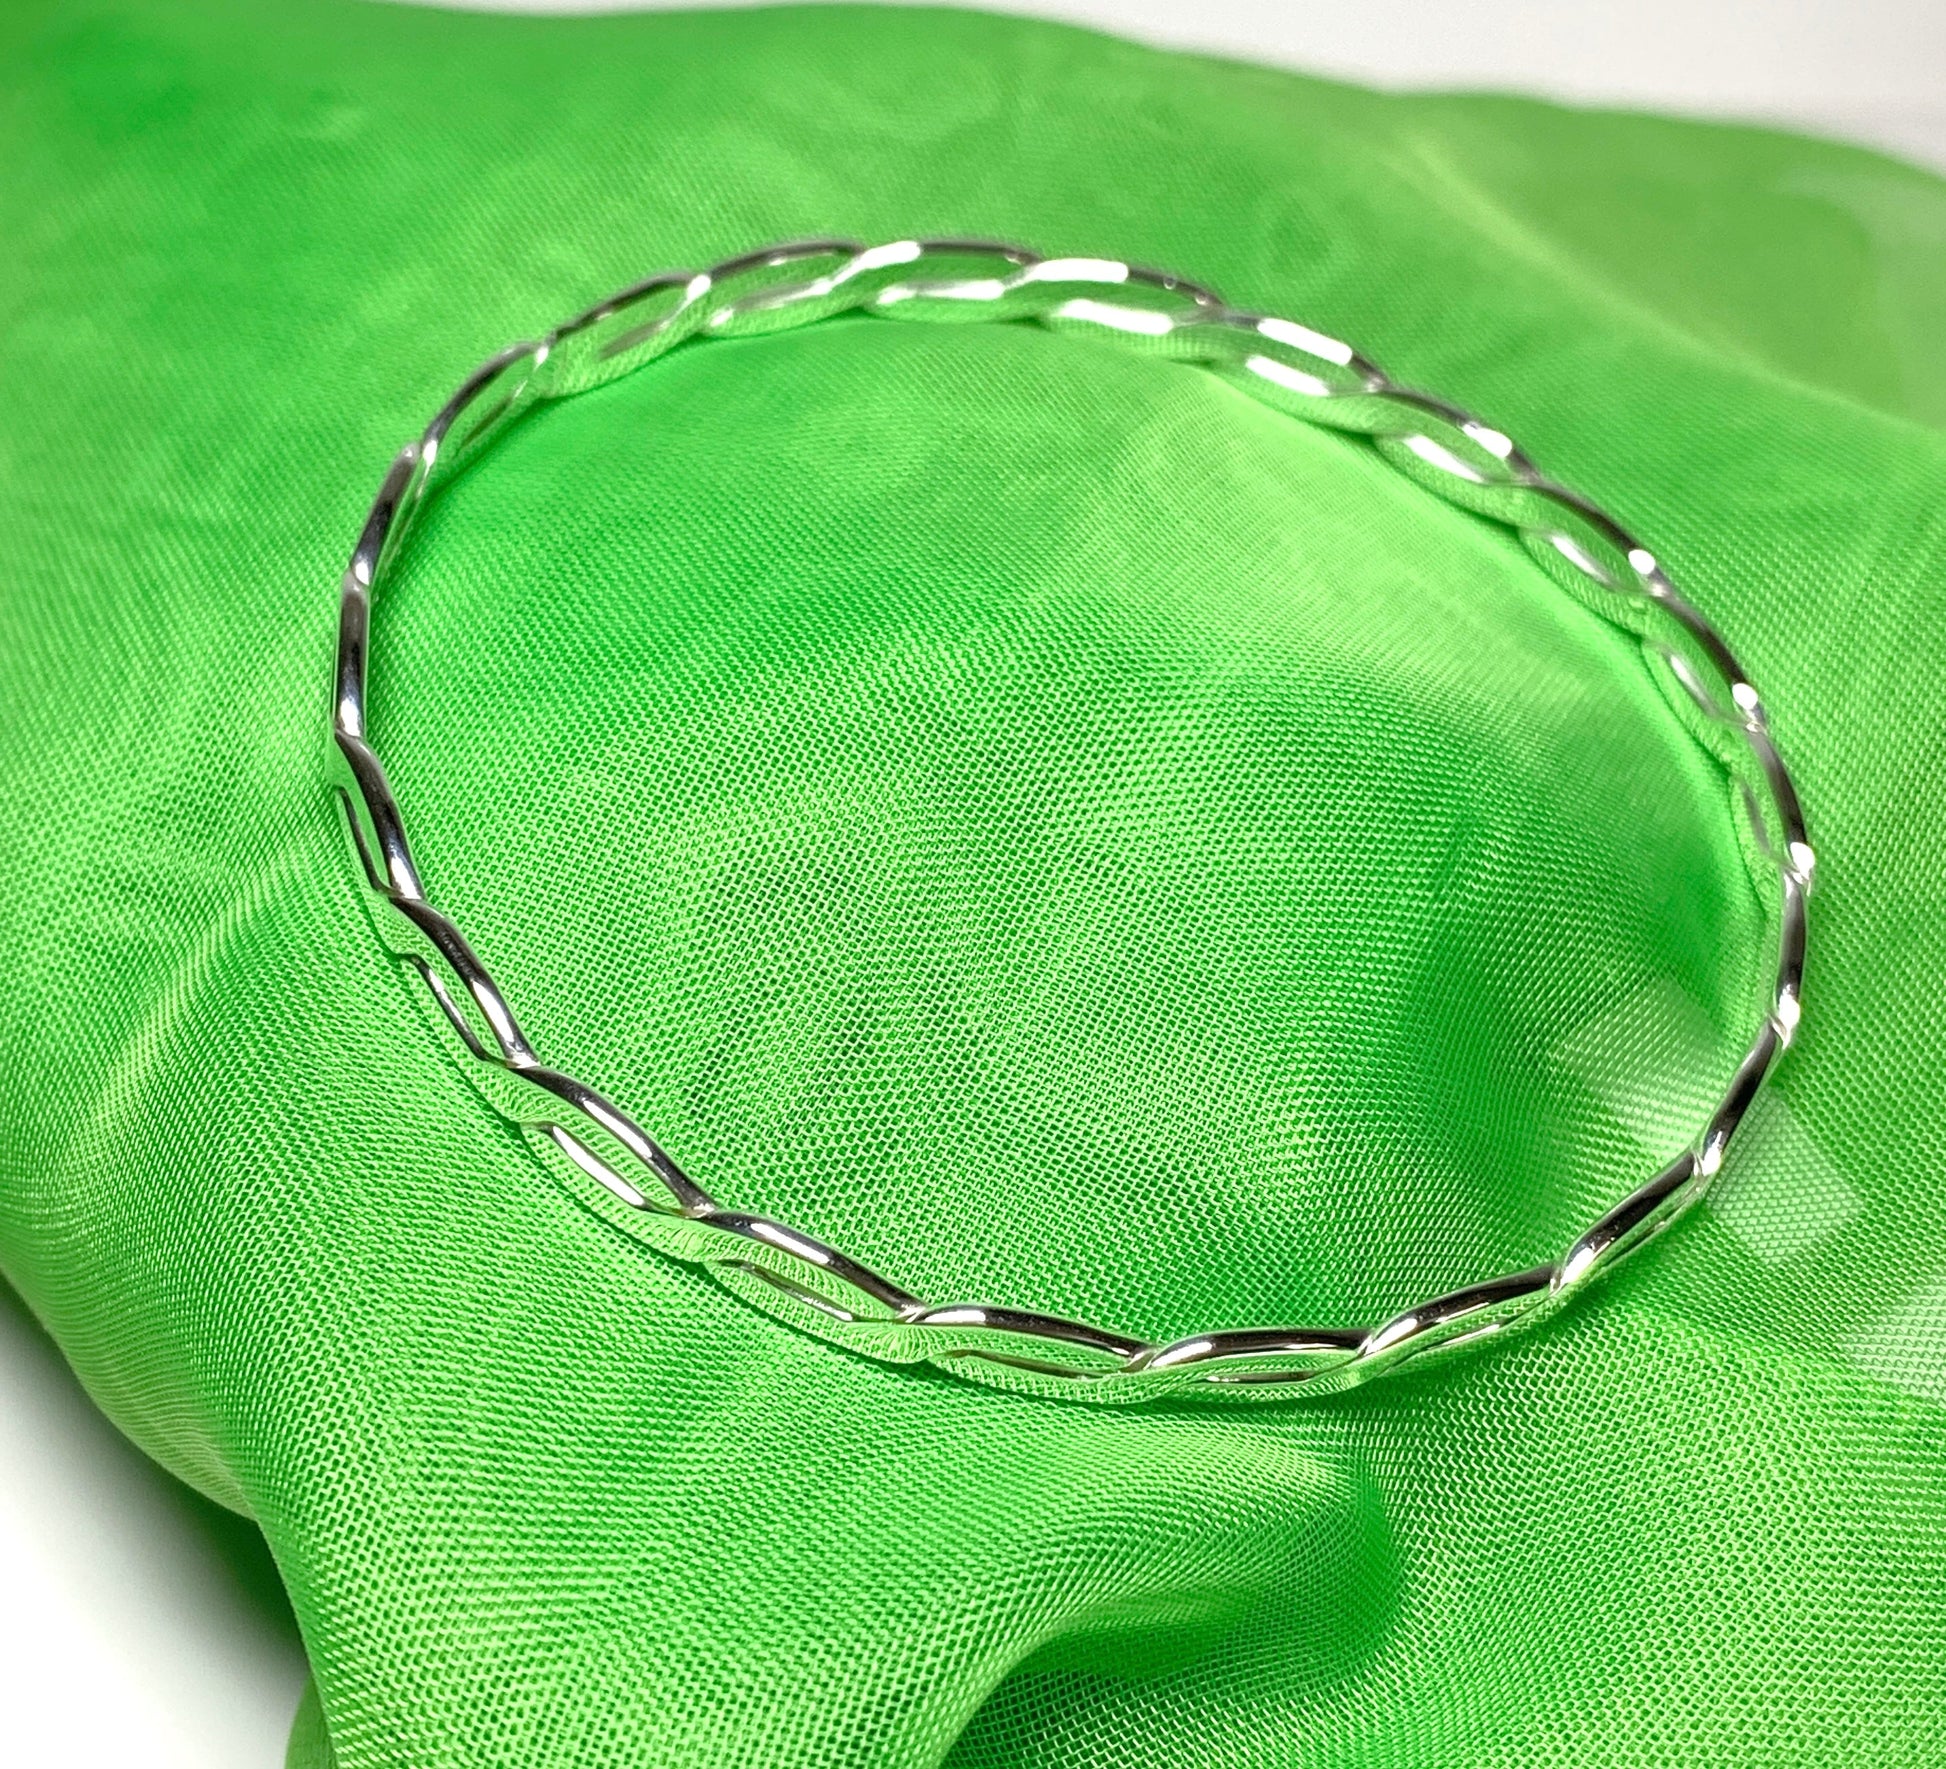 Bangle sterling silver solid twisted round slave